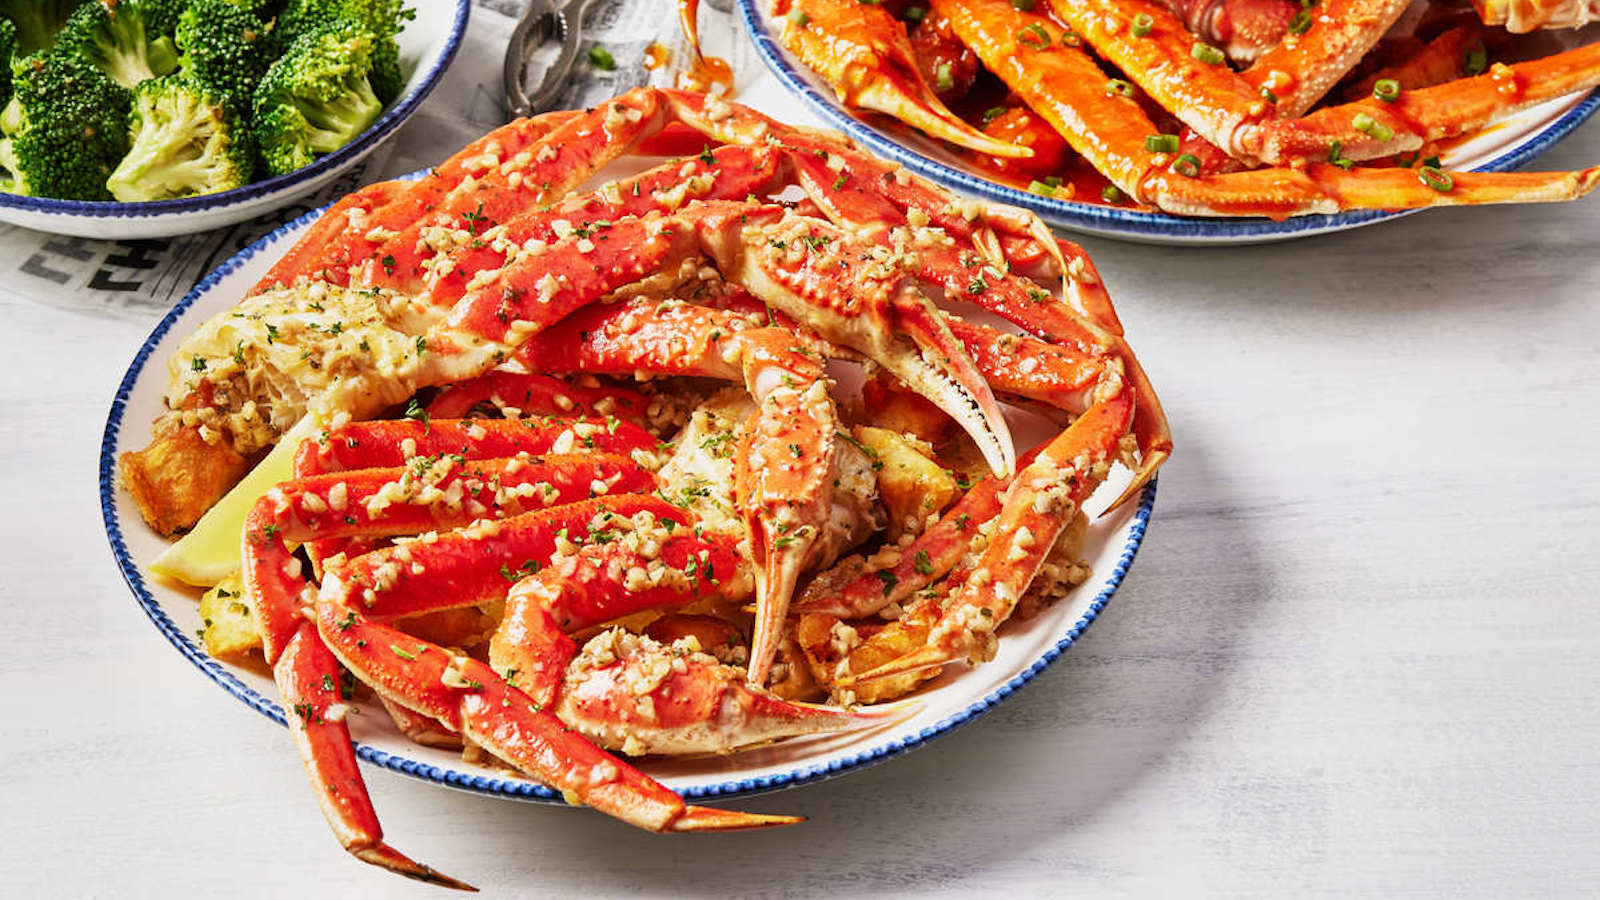 Crabfest Is Officially Back At Red Lobster, With Some New Additions